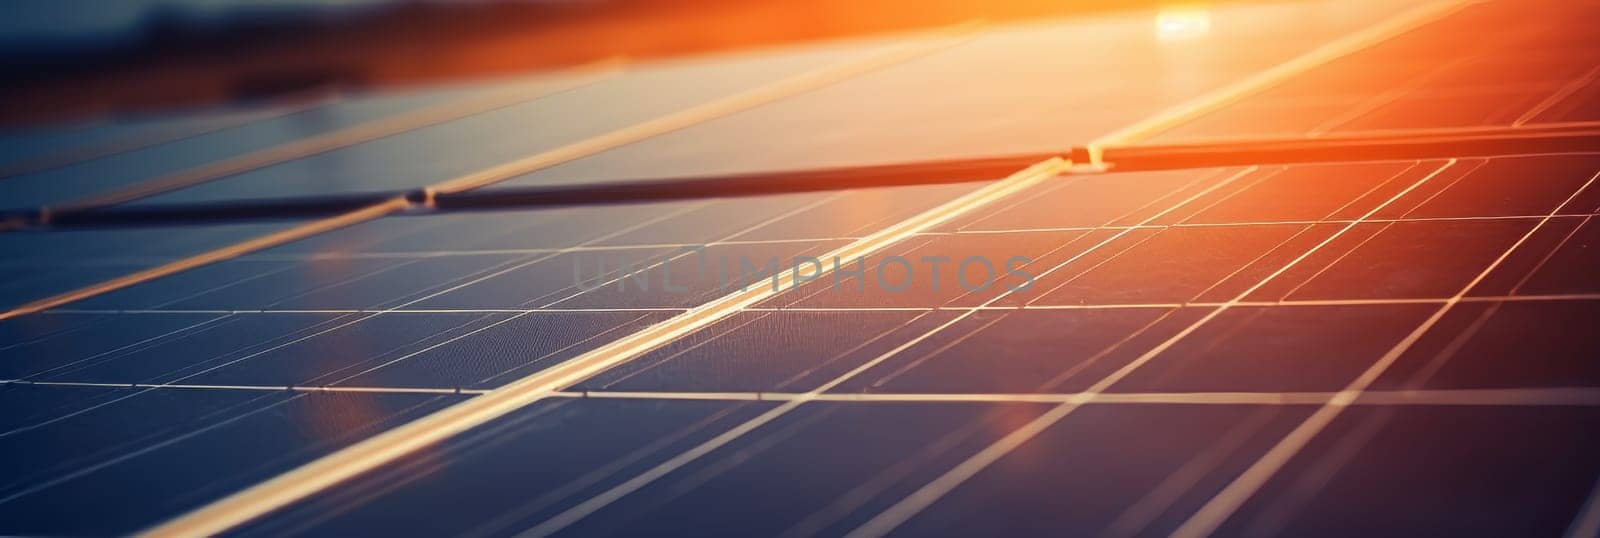 Close-up solar panels on house roof for energy saving and alternative electricity source